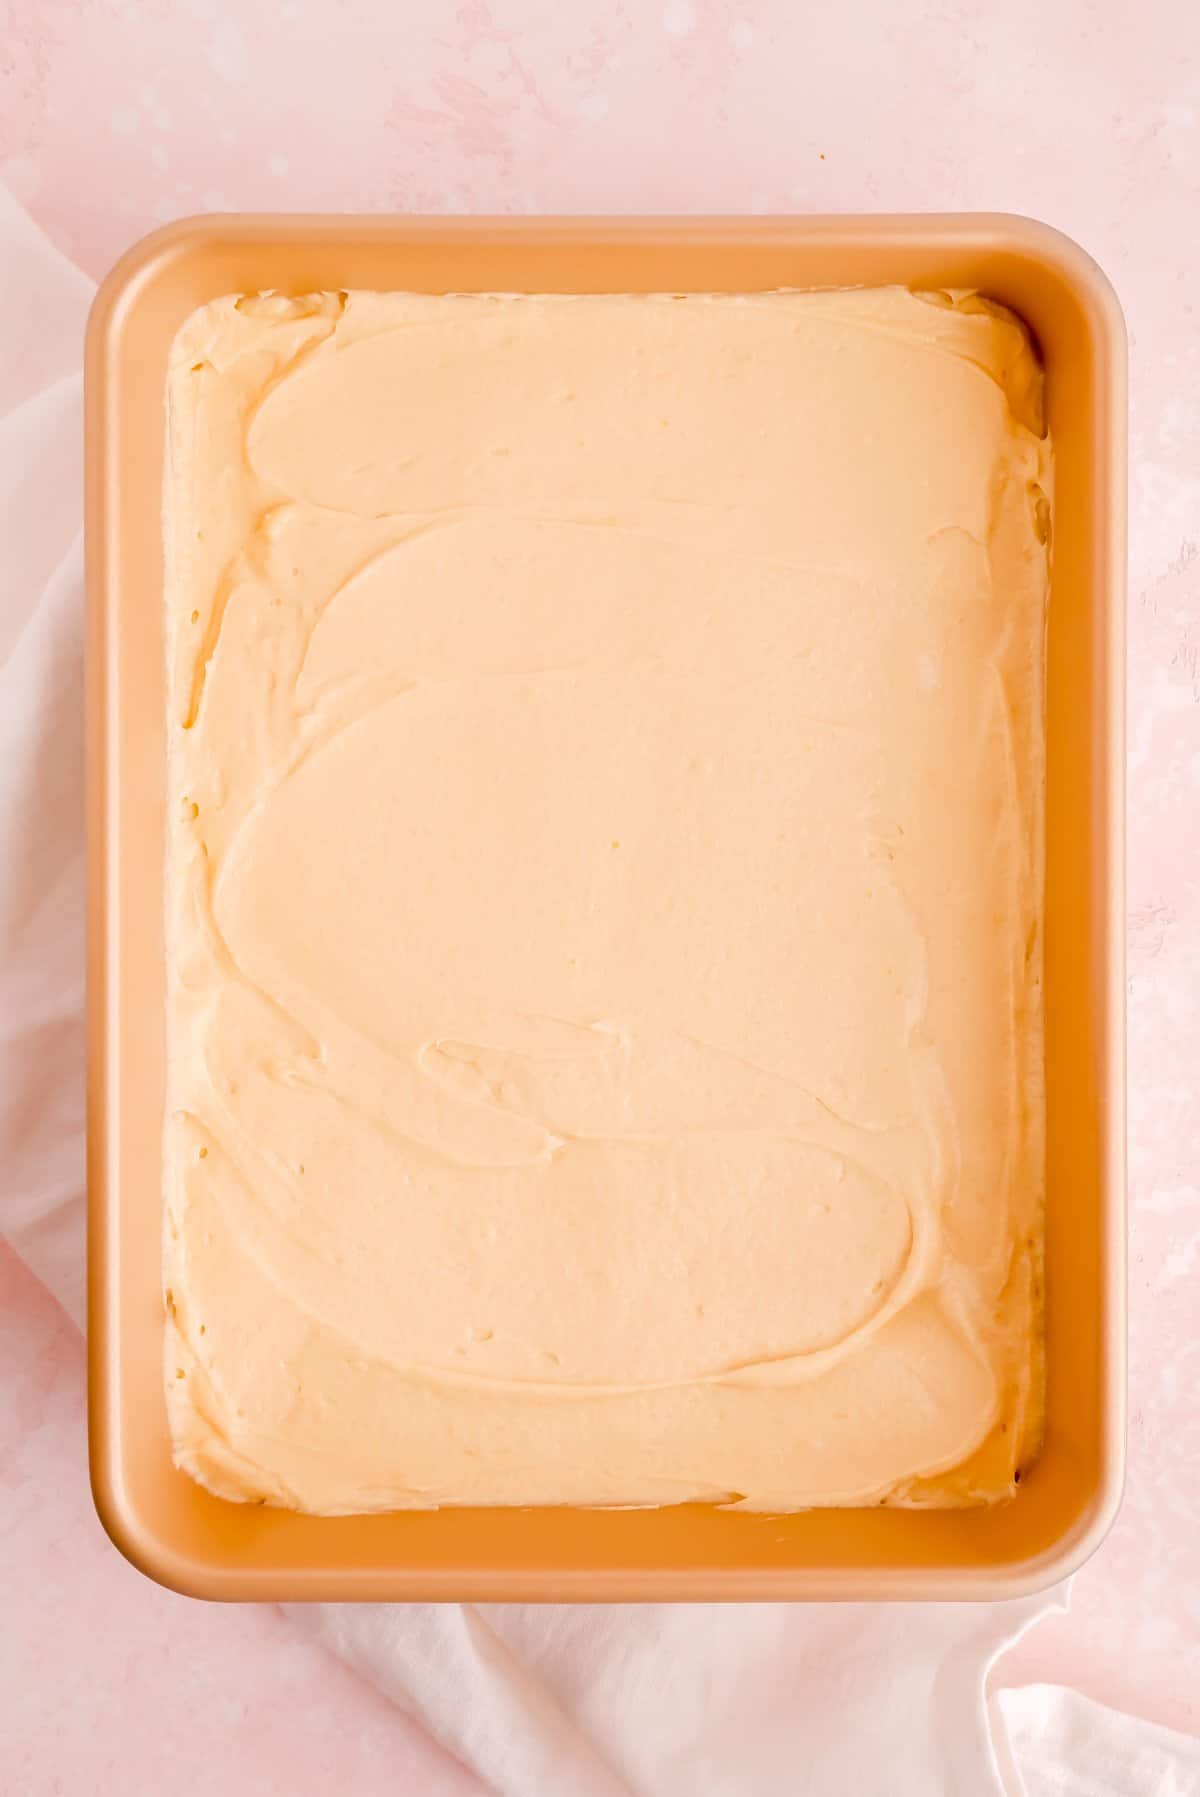 Vanilla sheet cake batter spread evenly in a gold 9 x 13 pan.